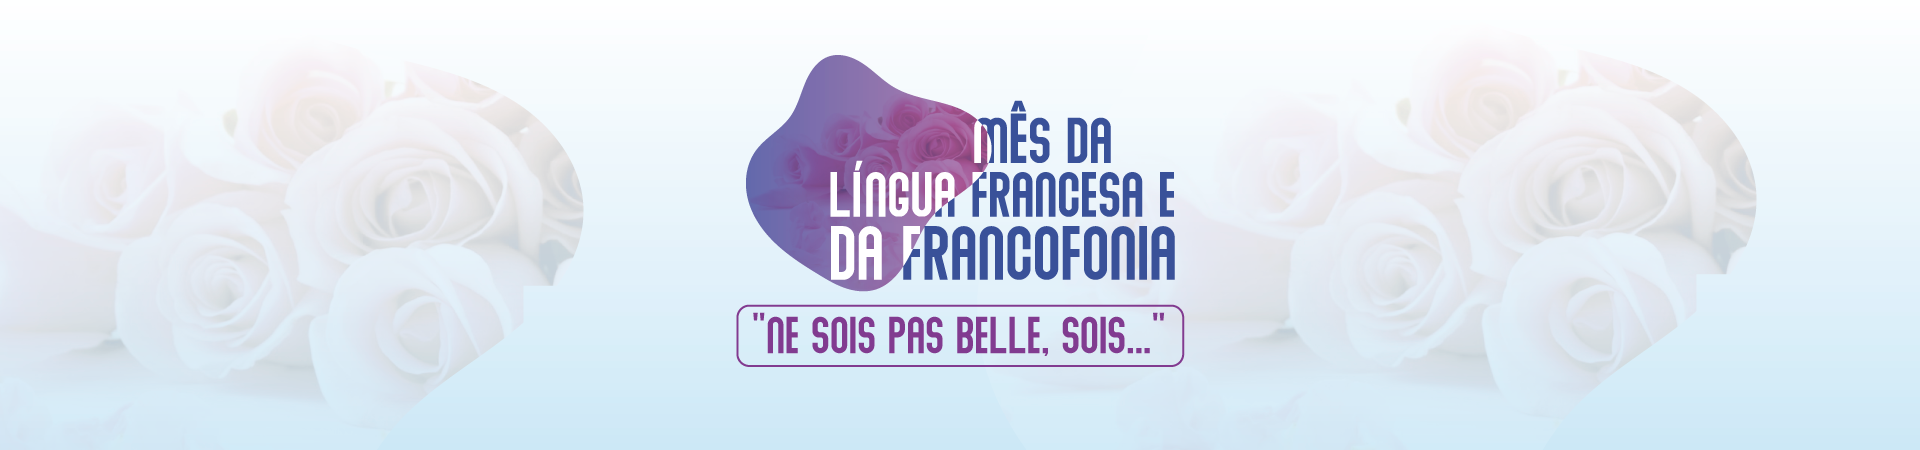 banner-site-francfonia-2019.png